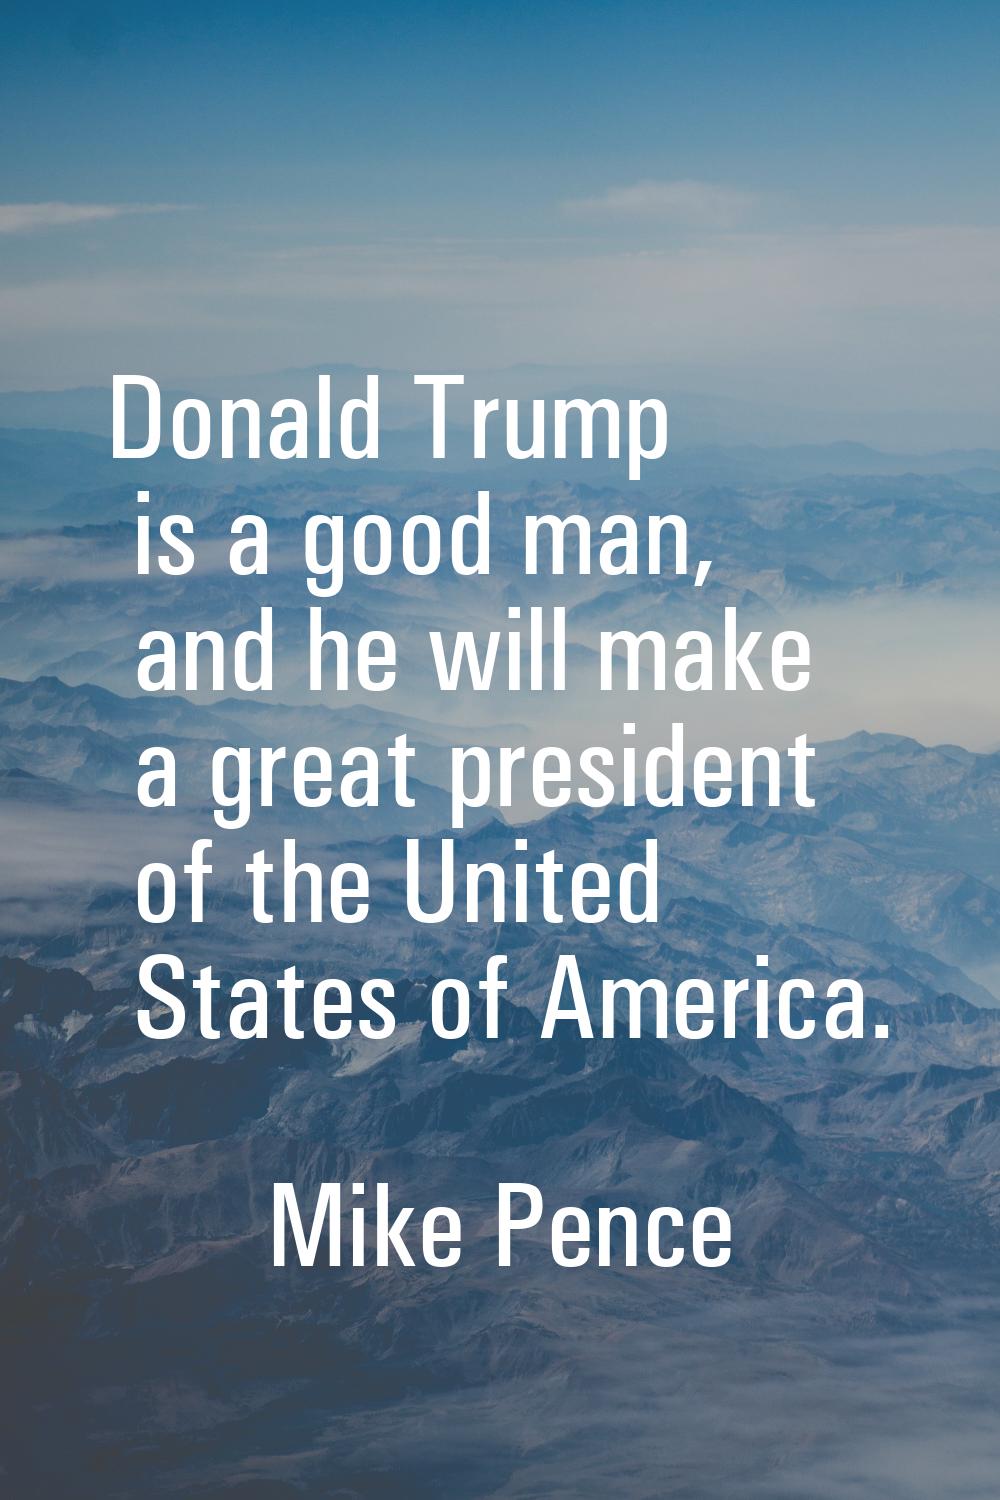 Donald Trump is a good man, and he will make a great president of the United States of America.